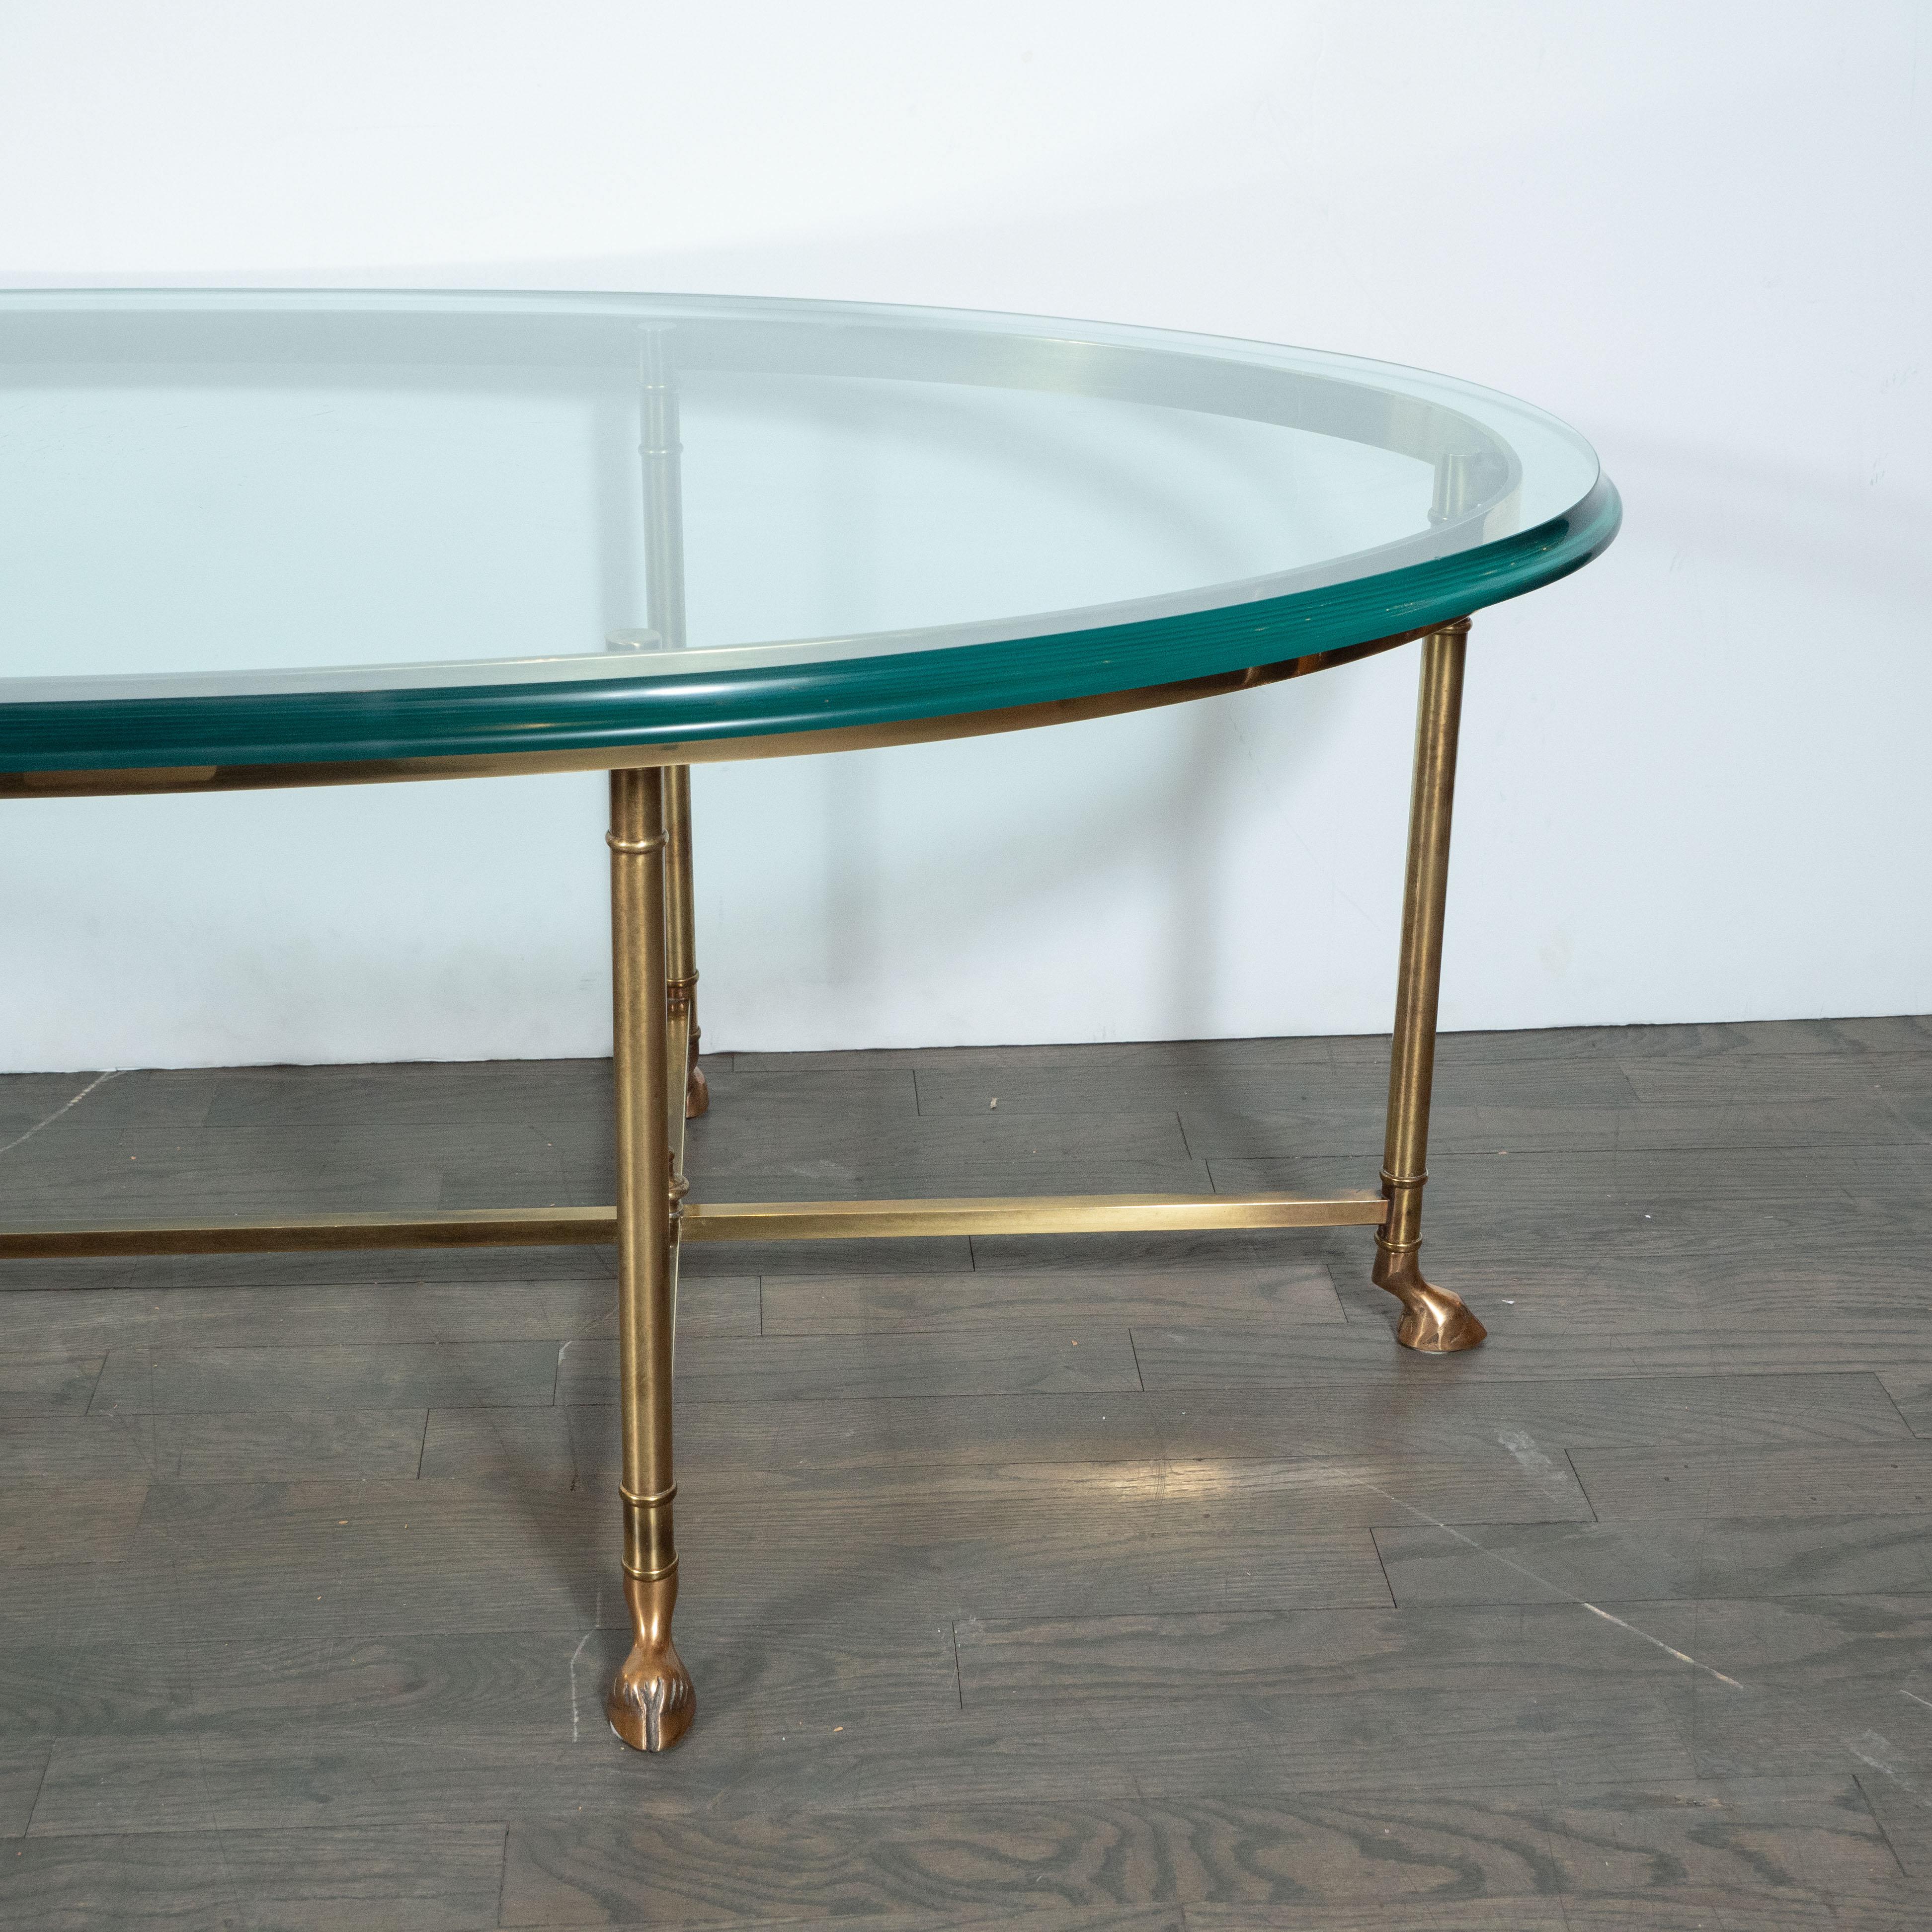 This Mid-Century Modern oval cocktail table was created in the manner of Jansen, circa 1960. The table has an oval-shaped bevelled glass top which is supported by six slender brass legs. Each leg sits on a stylized brass hoof, a nod to classical